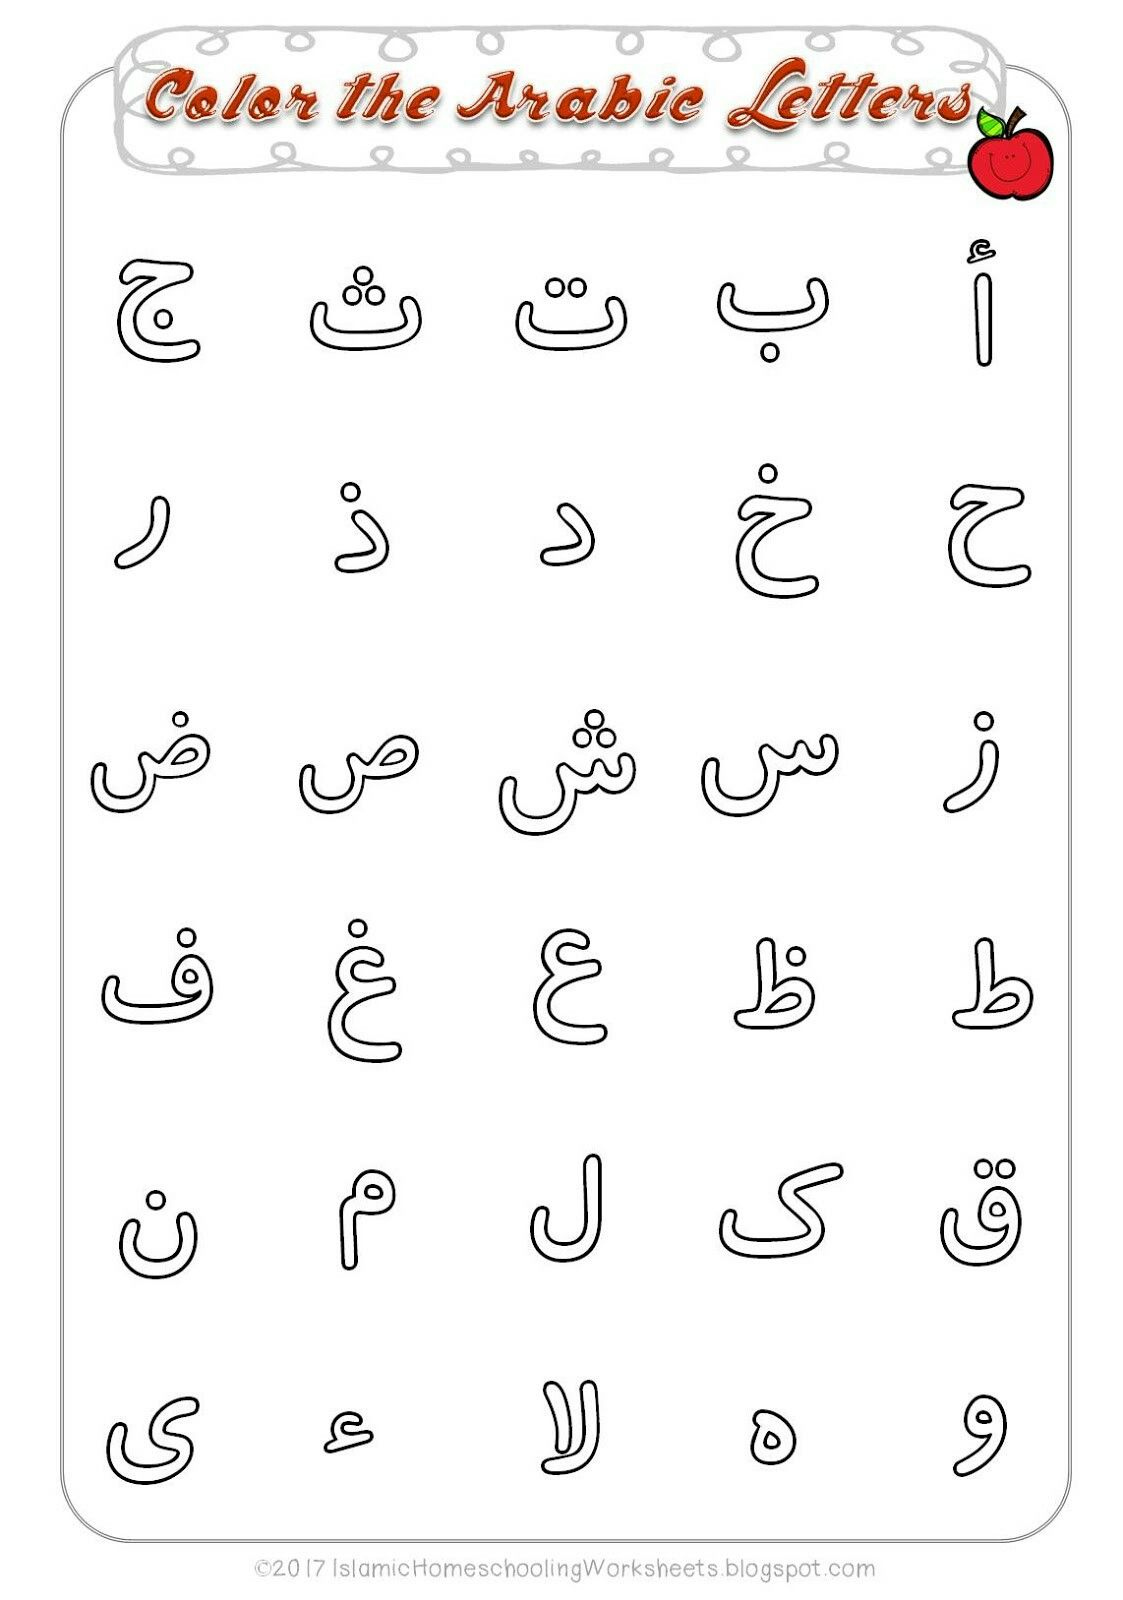 Pin By Brownie Thi On FREE Arabic Worksheets Alphabet Worksheets 